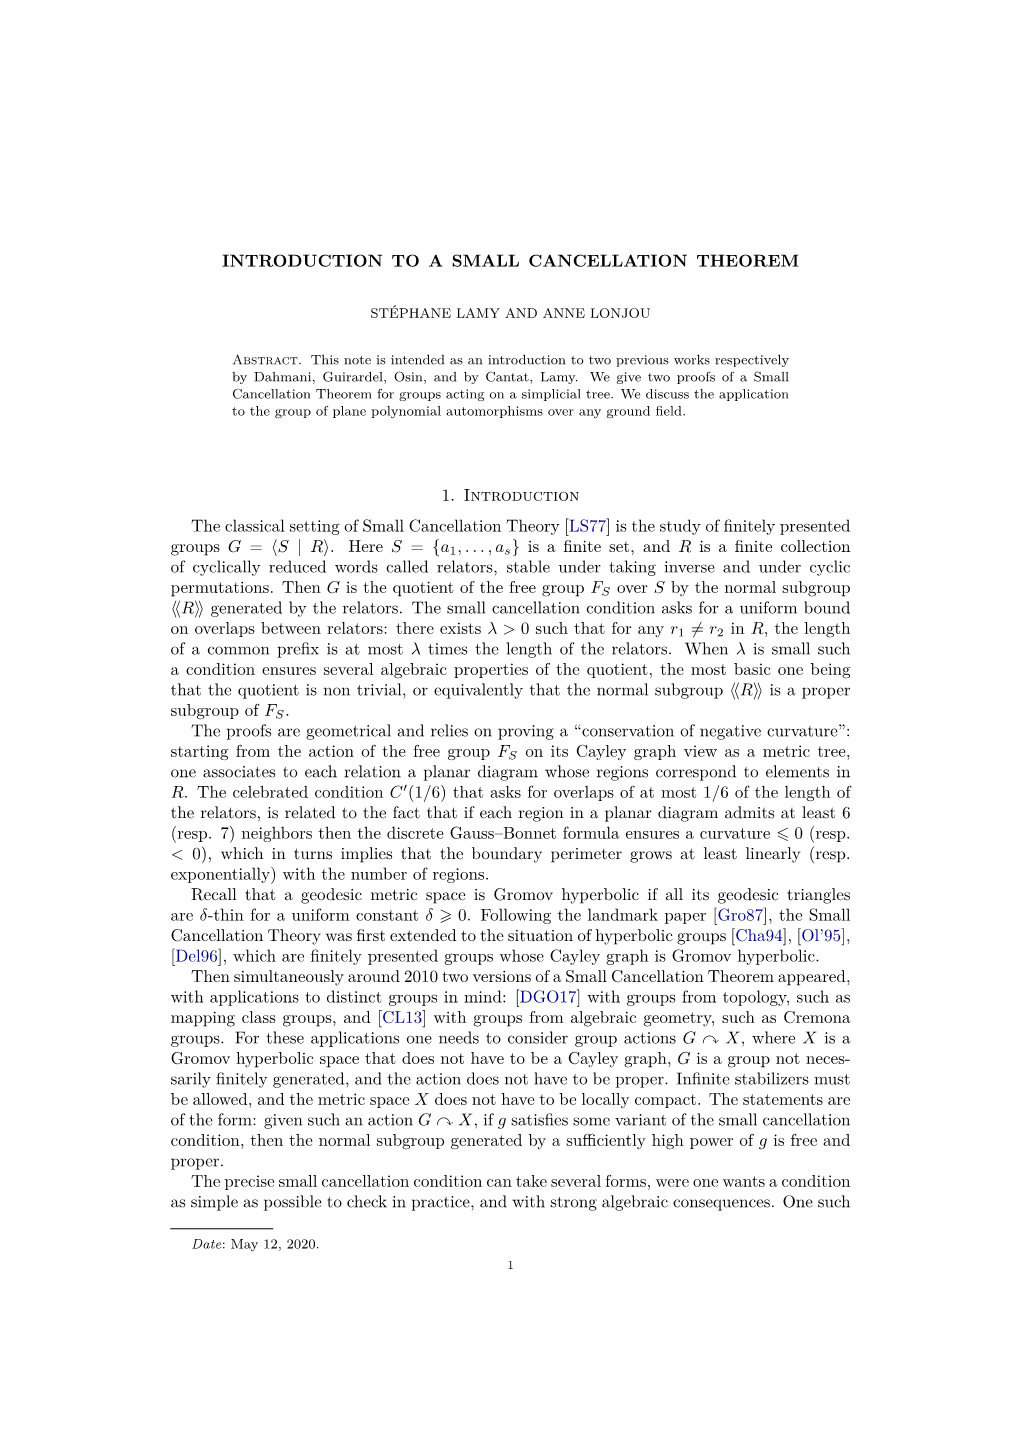 Introduction to a Small Cancellation Theorem